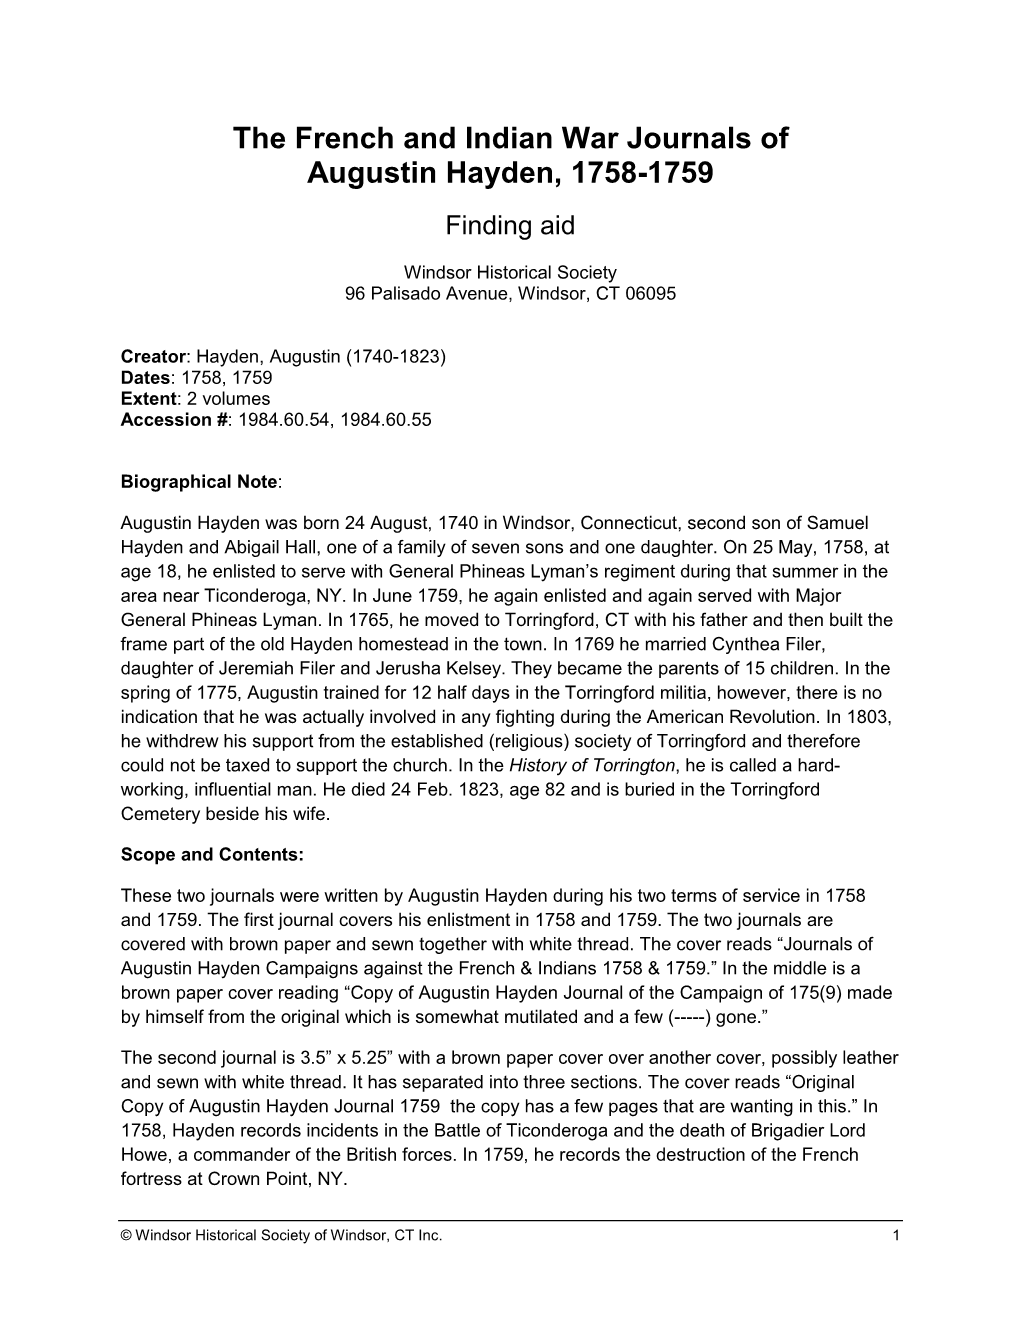 The French and Indian War Journals of Augustin Hayden, 1758-1759